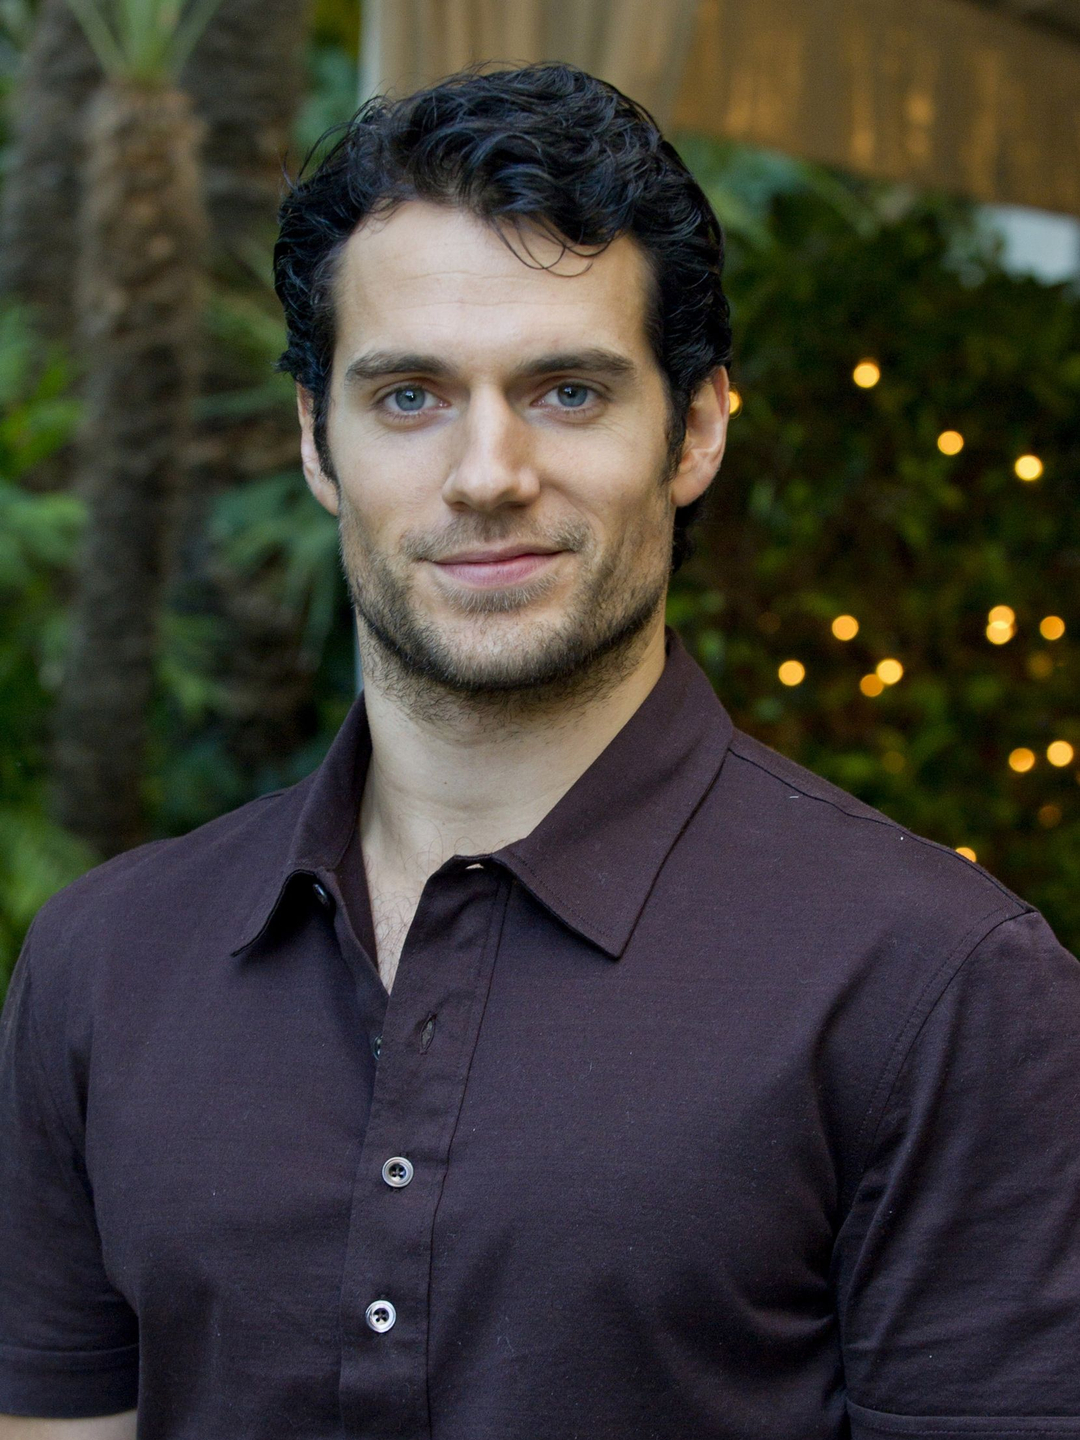 Henry Cavill does he have kids